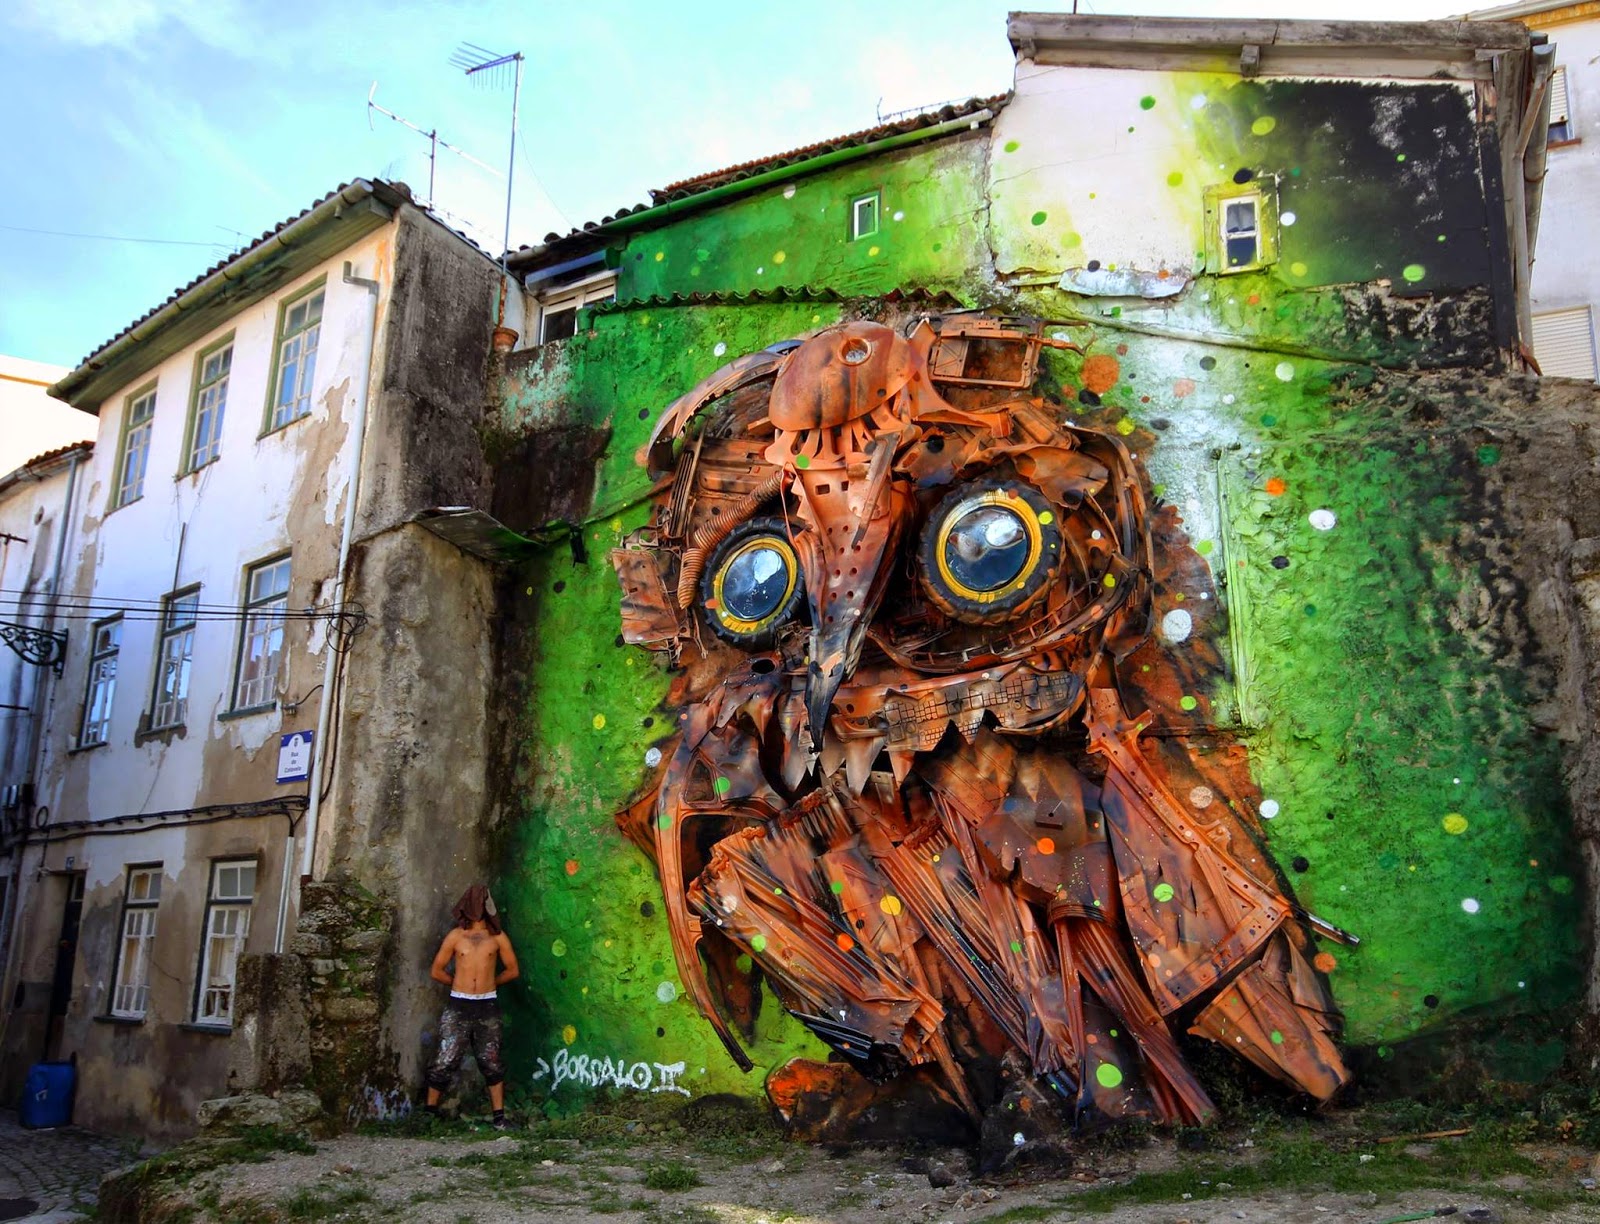 Our friend Bordalo II recently stopped by the lovely city of Covhila in Portugal where he was invited to work on a new installation for the excellent Wool Festival.